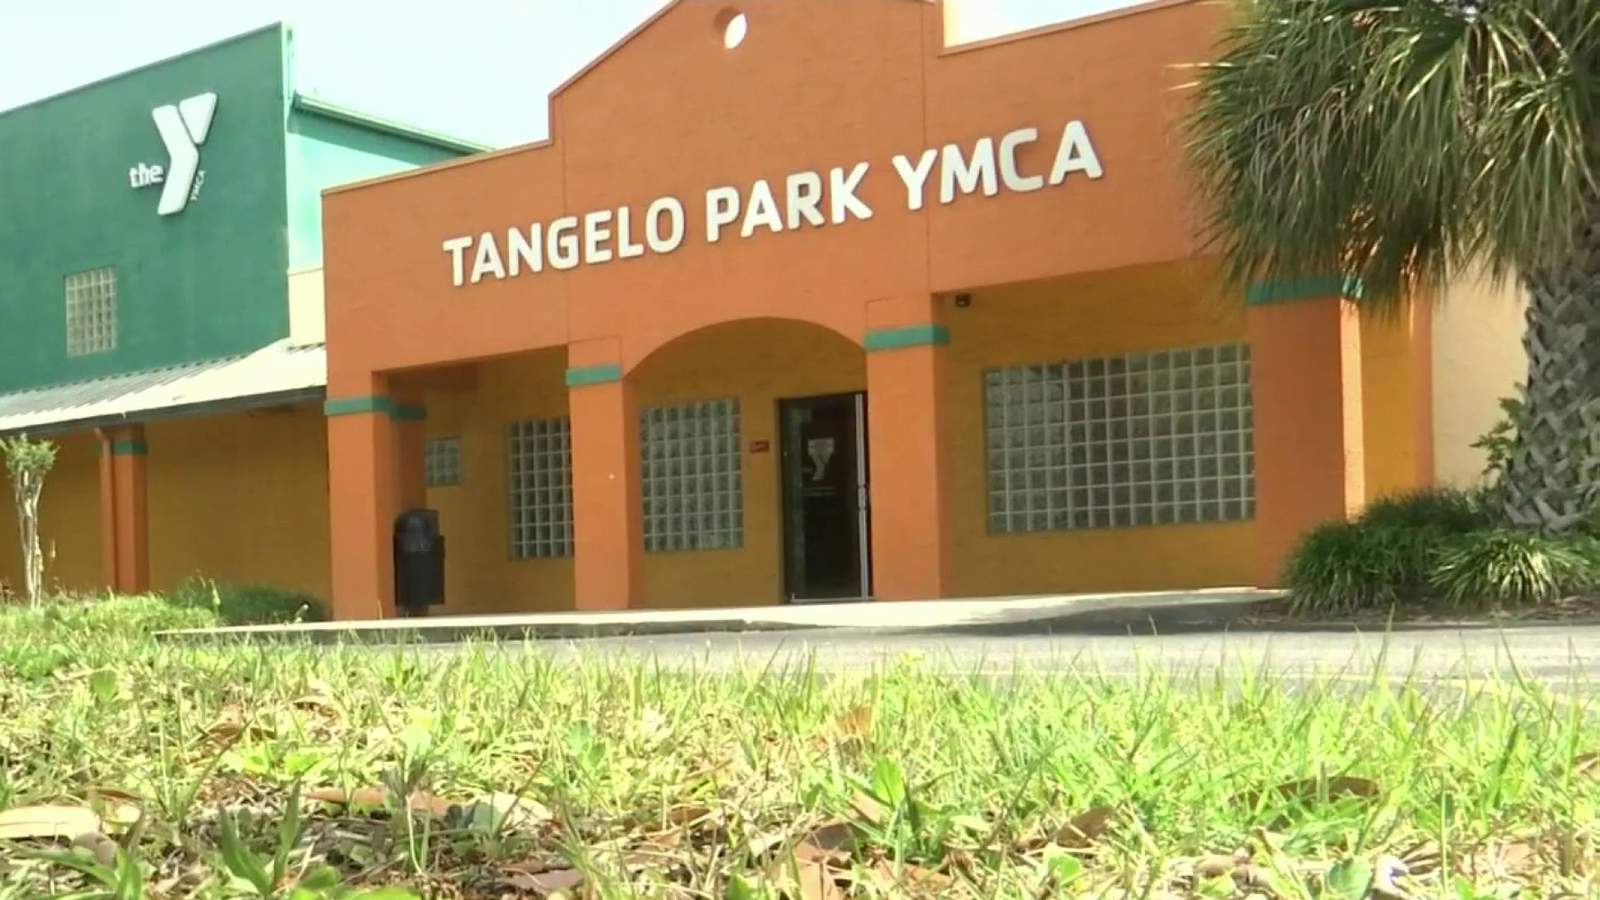 Revitalization of Tangelo Park YMCA may soon get greenlight as Orange County takes initiative